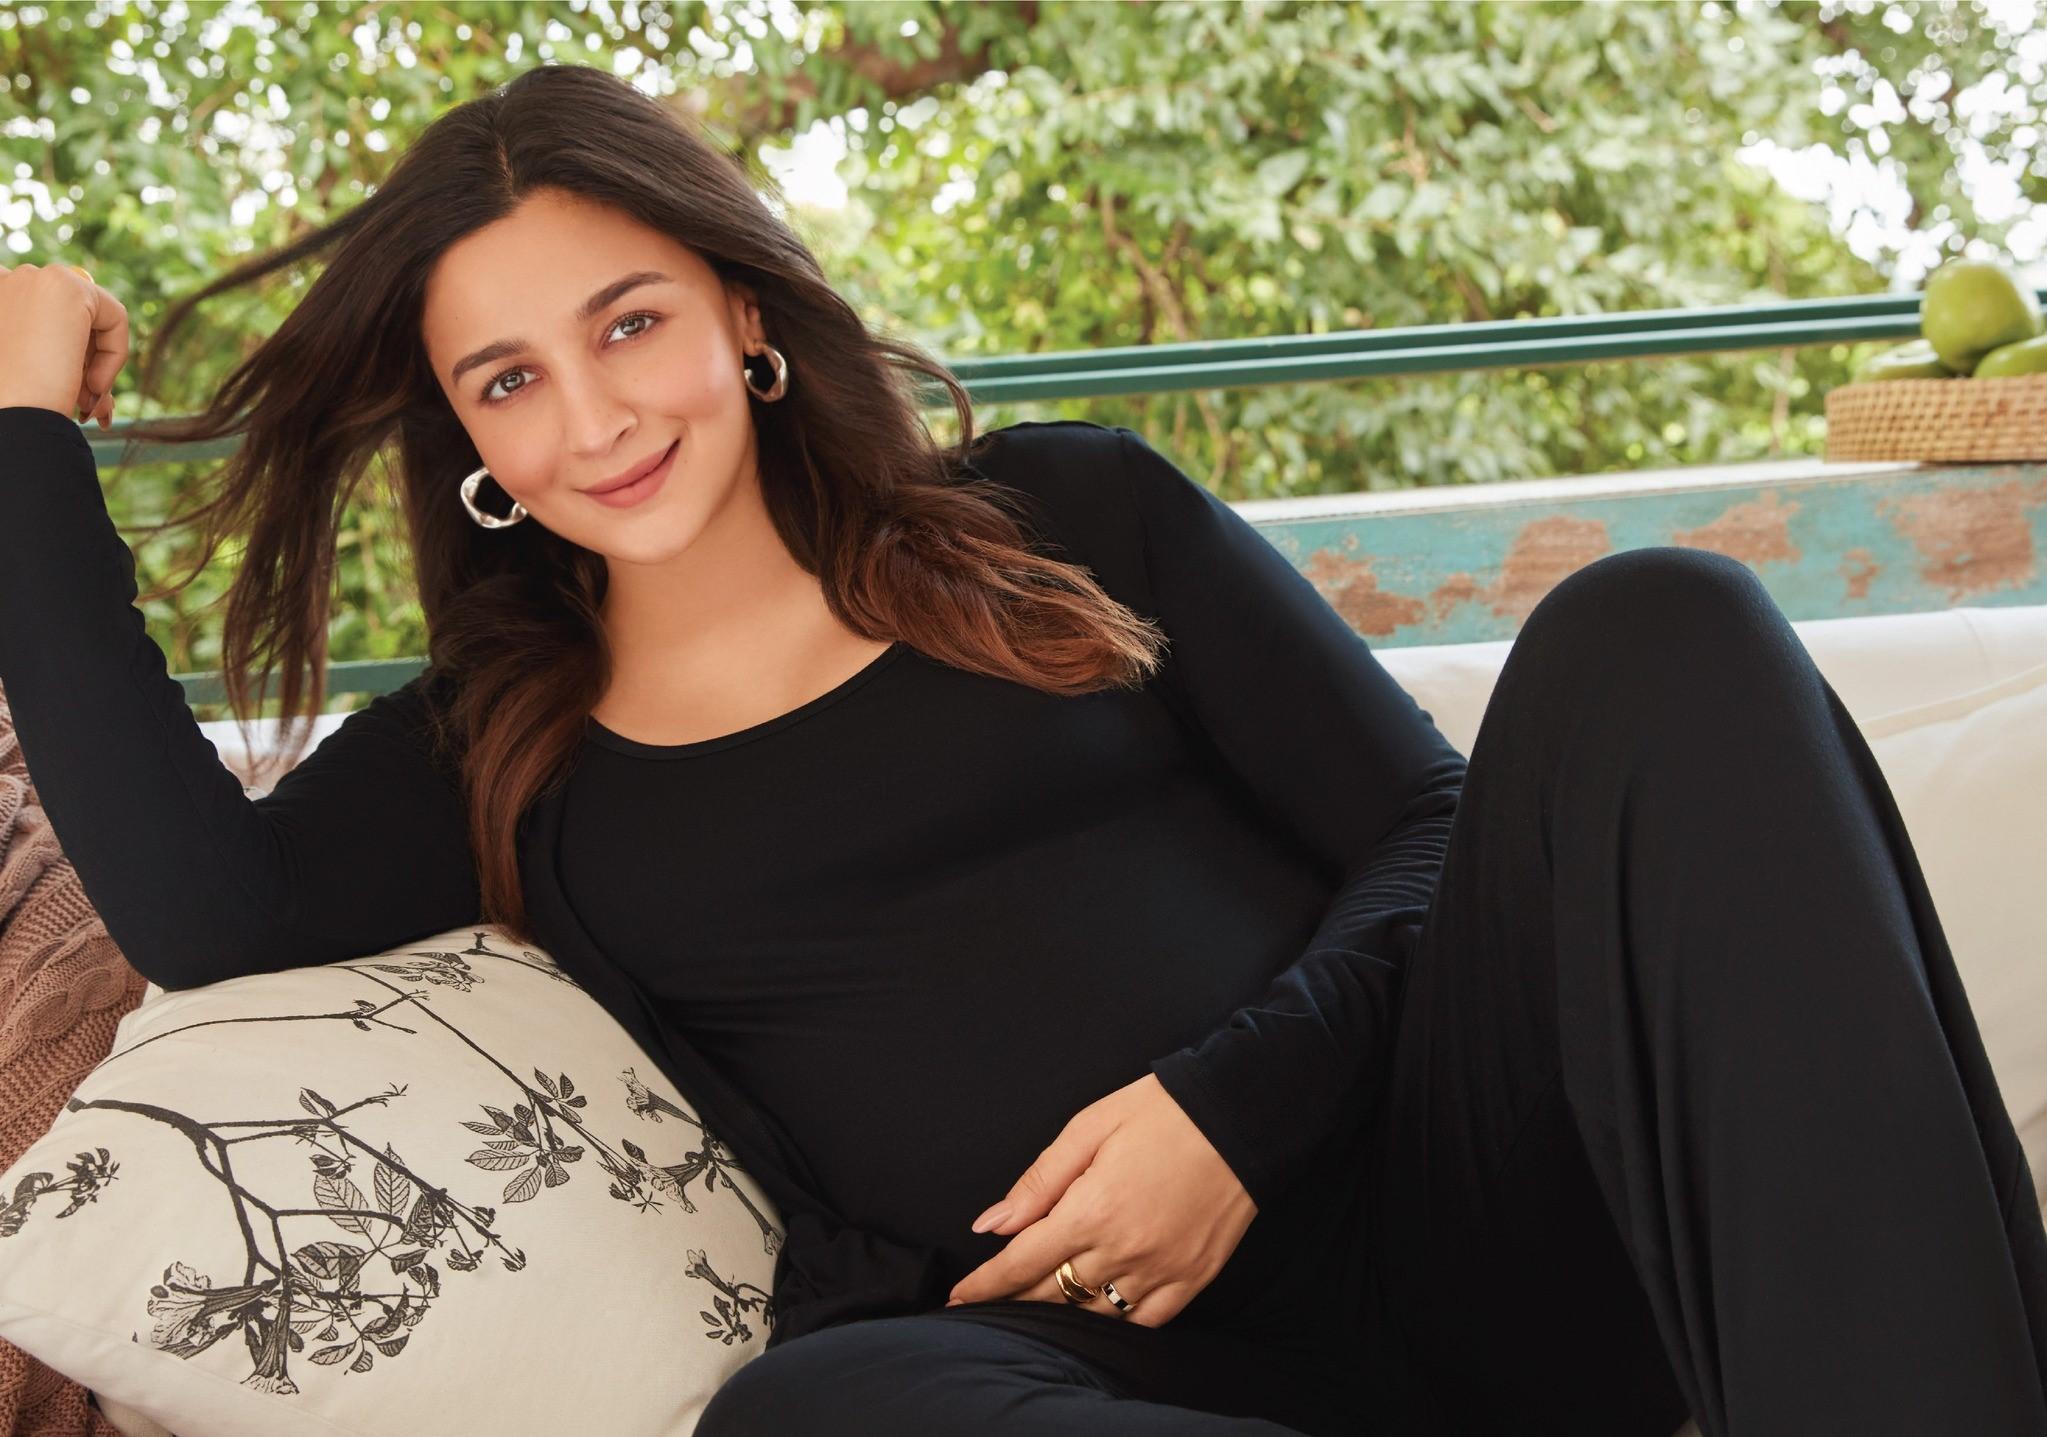 New Mum Alia Bhatt Says “Appreciate What Your Body Has Done And Listen To Your Body Post-Delivery”